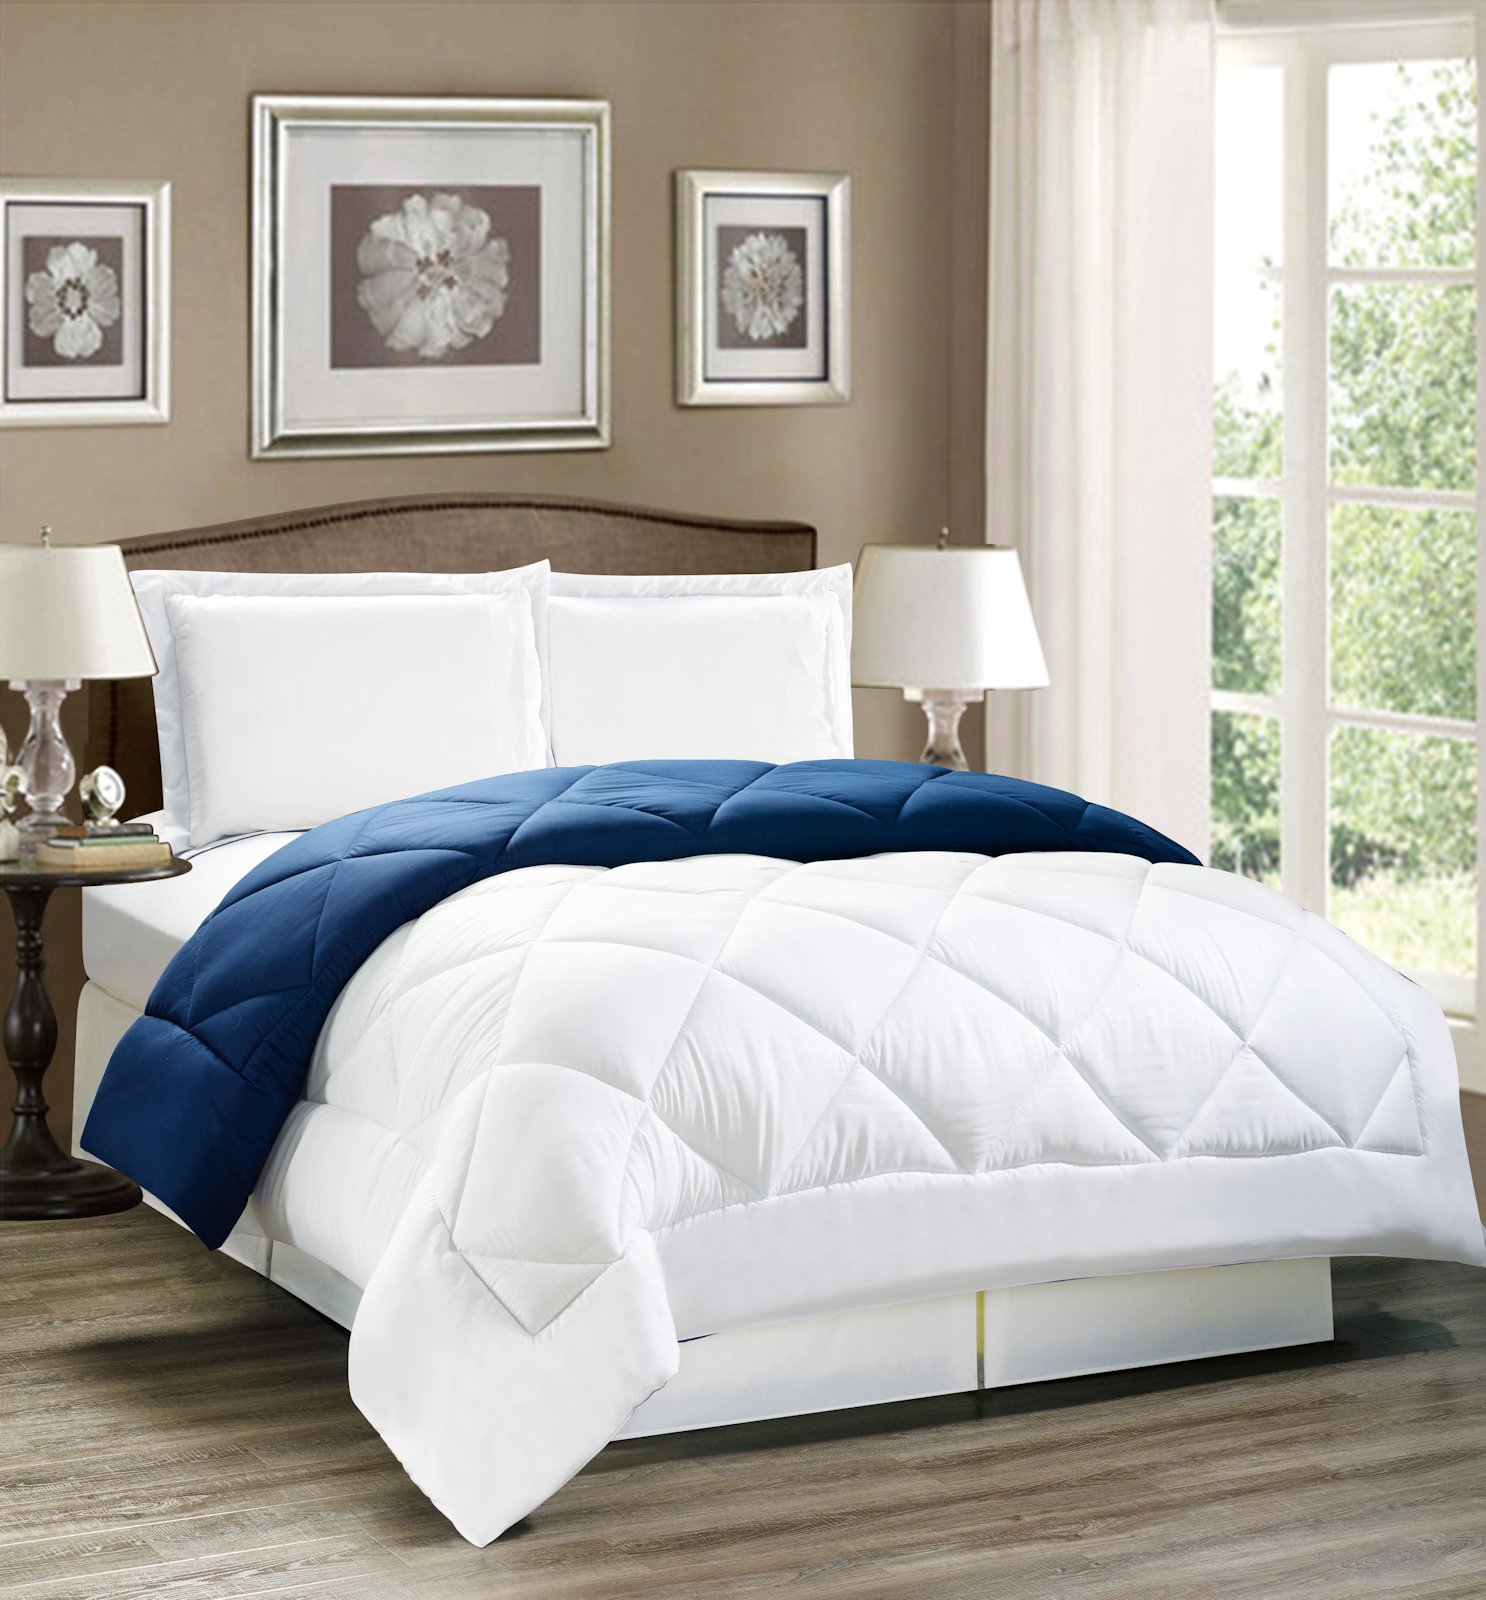 navy blue and white bedroom decor